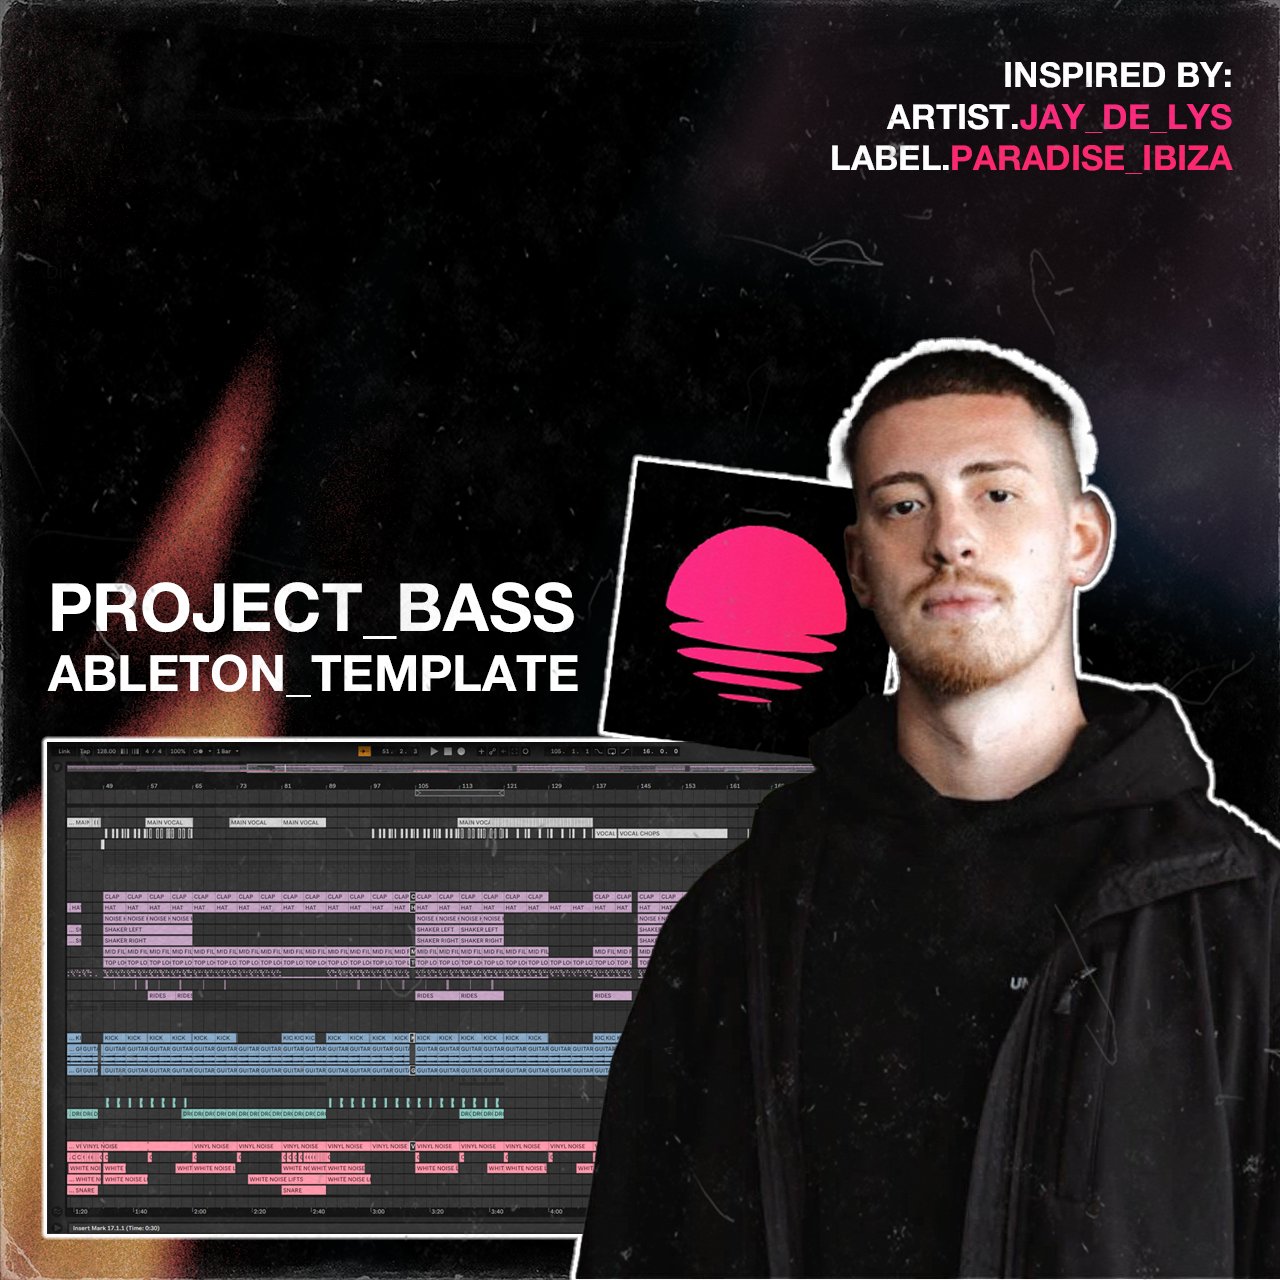 Jay De Lys inspired Ableton Template - project_bass - Tunebat Marketplace